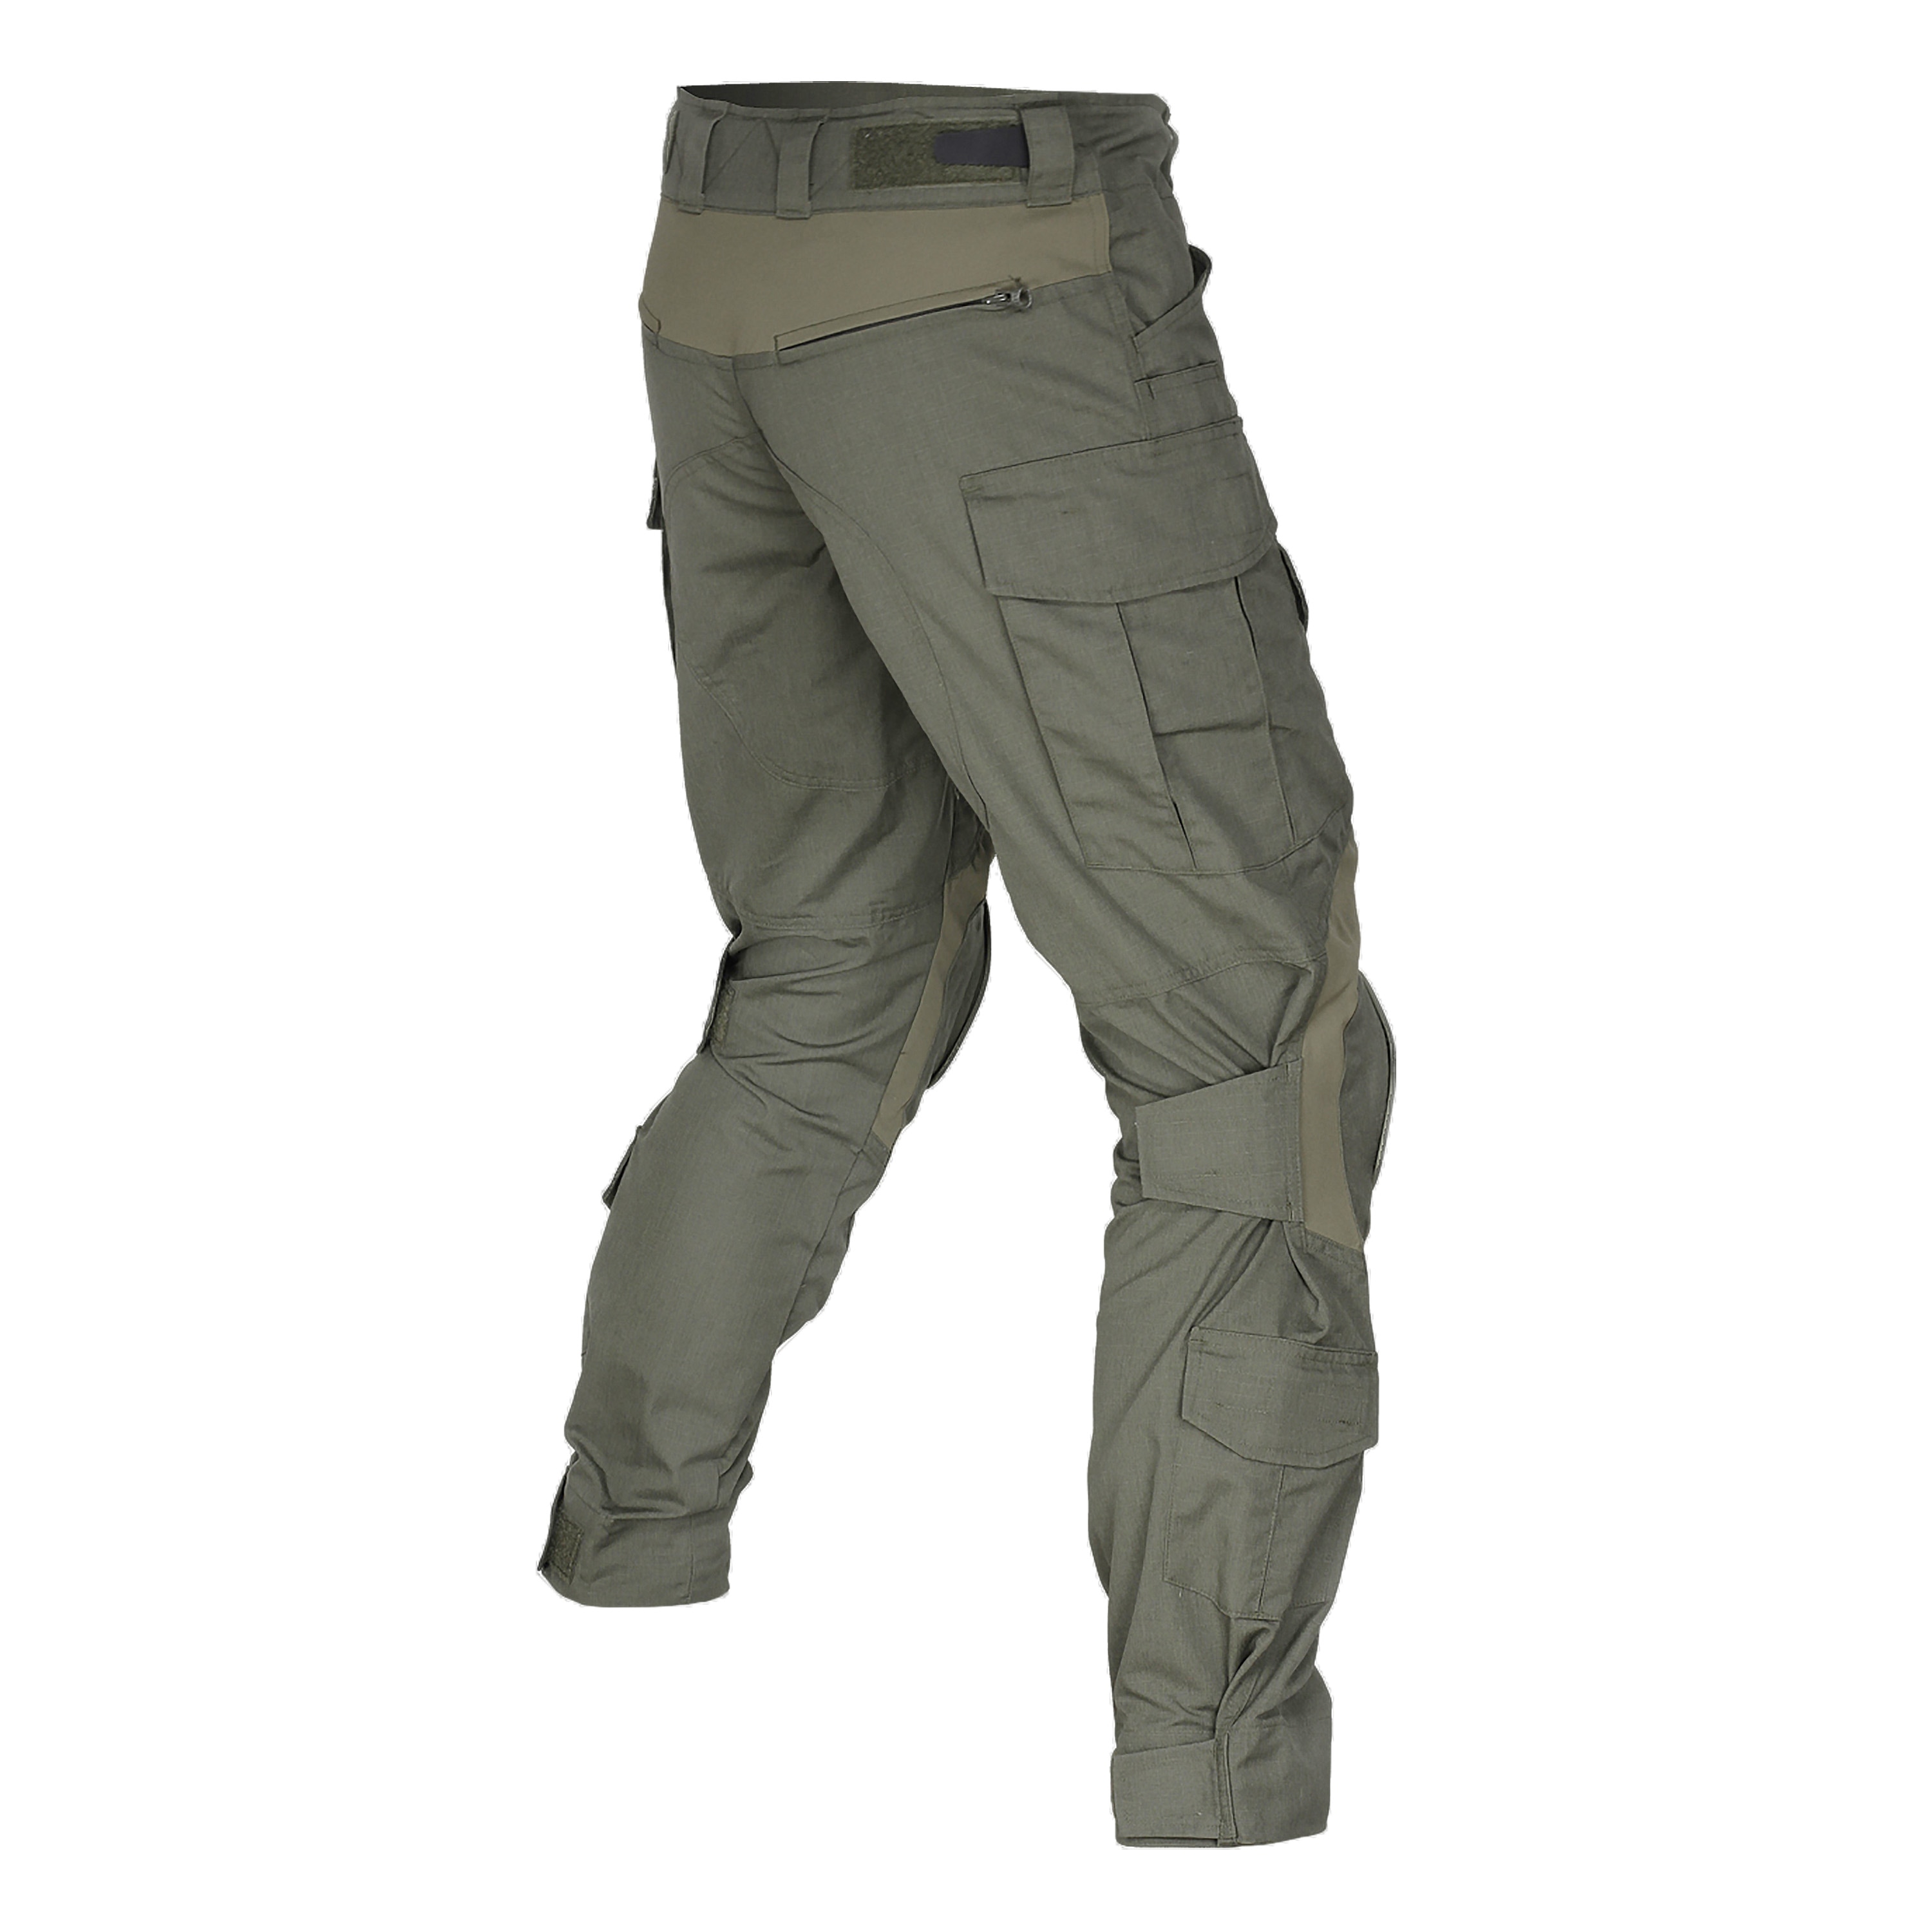 Purchase the Combat Pants Crye Precision G3 olive by ASMC